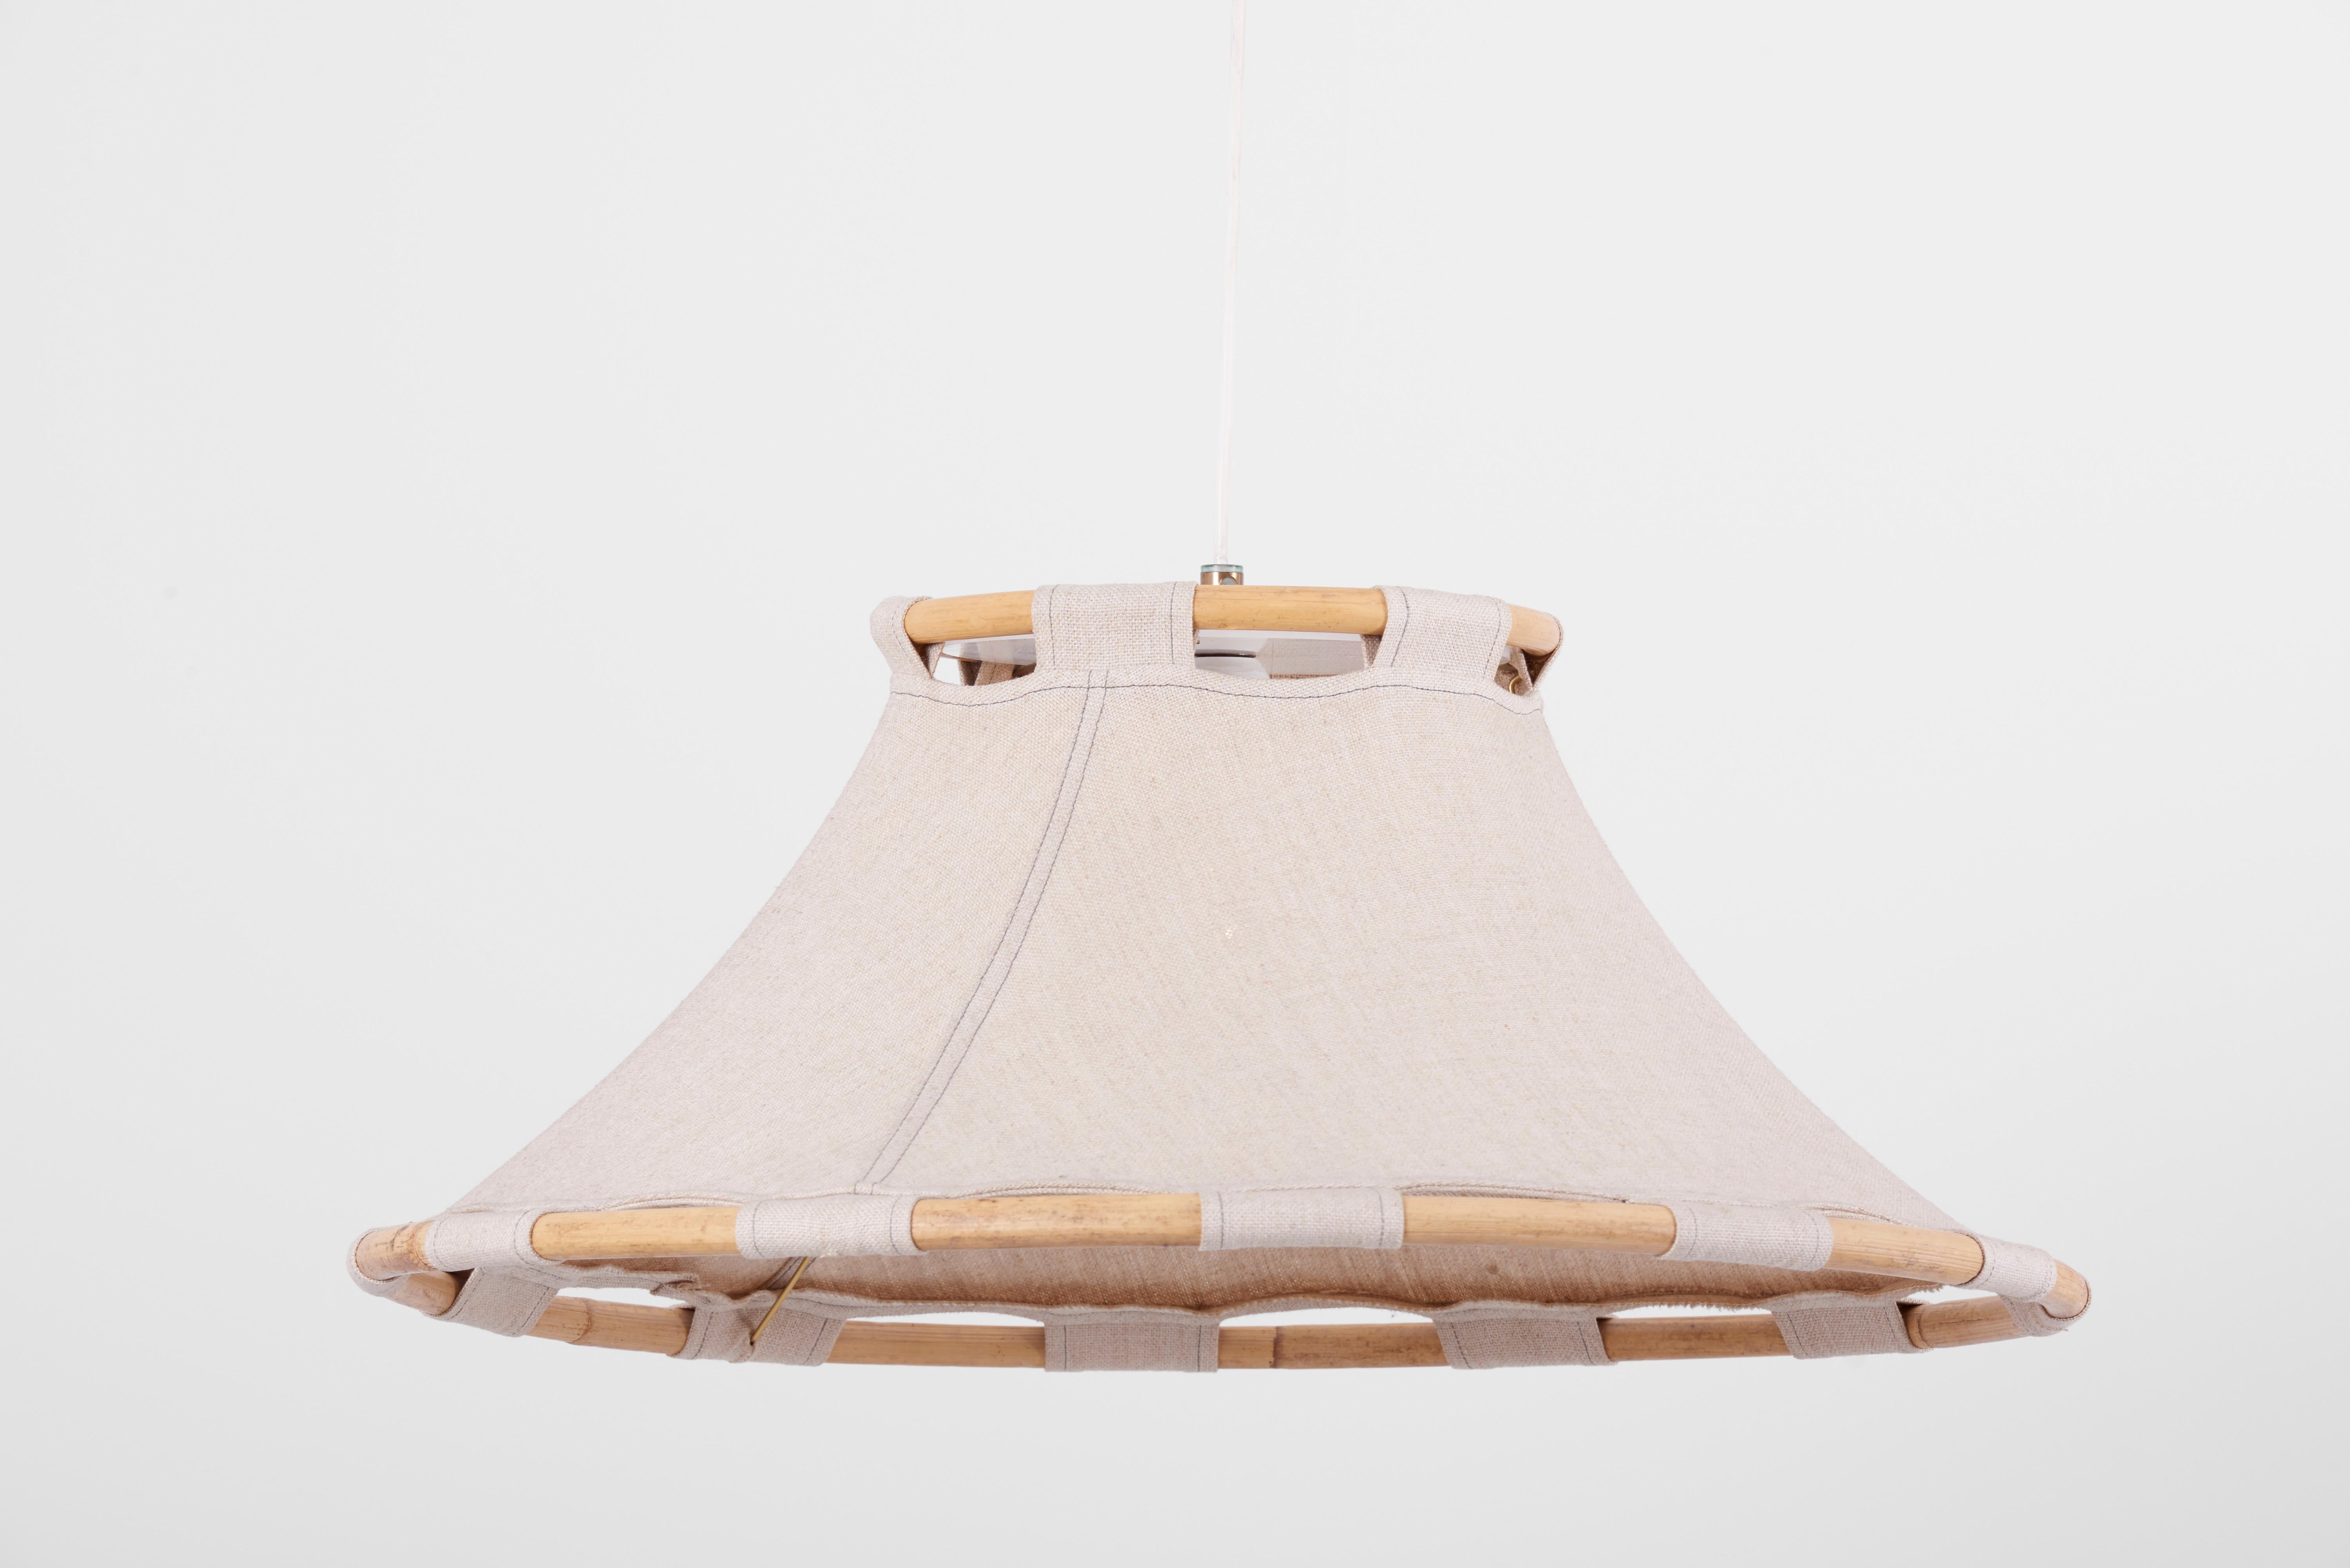 Scandinavian Modern pendant lamp, designed 1970s by Anna Ahrens and manufactured by Ateljé Lyktan in Sweden. Made of wood and fabric, with brass details and an acrylic diffuser. Good condition.

1 x E27 socket.

Please note: Lamp should be